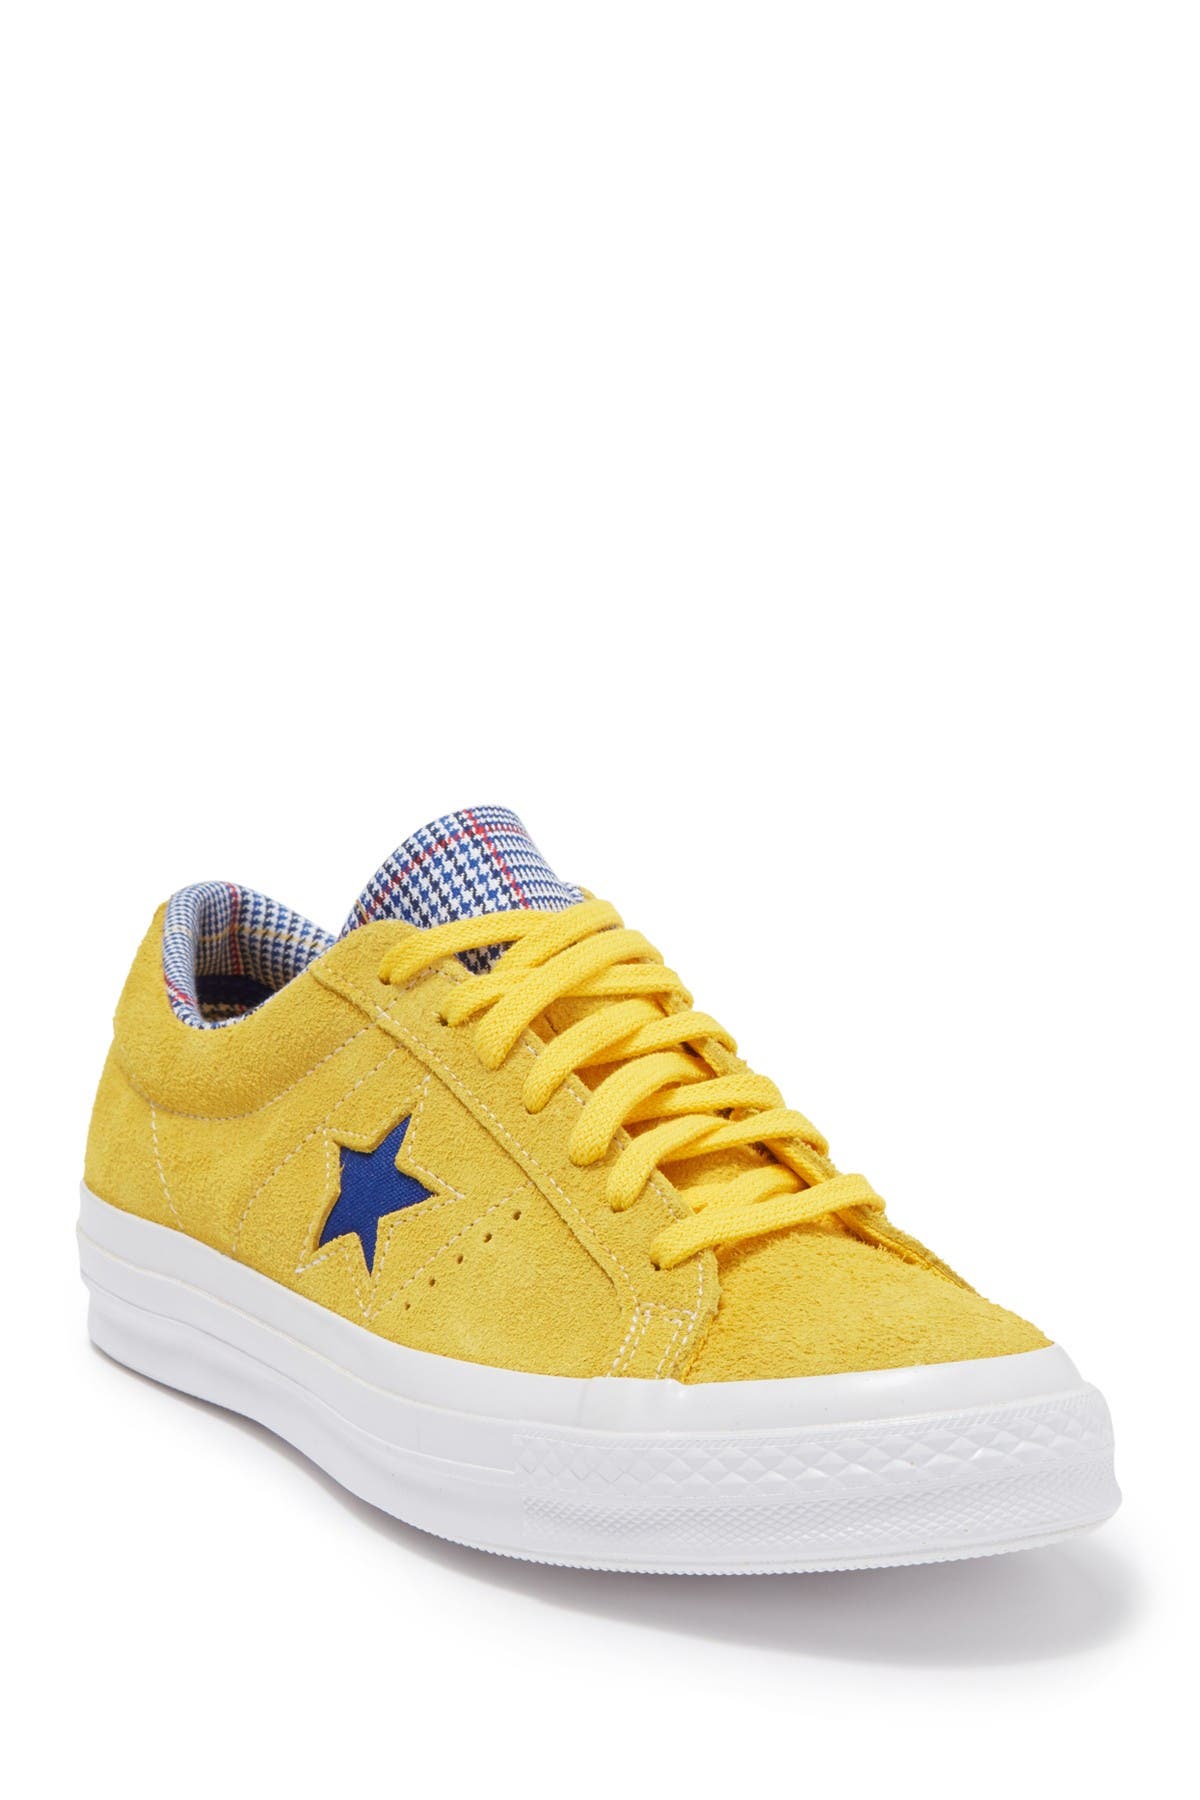 converse one star oxford sneakers